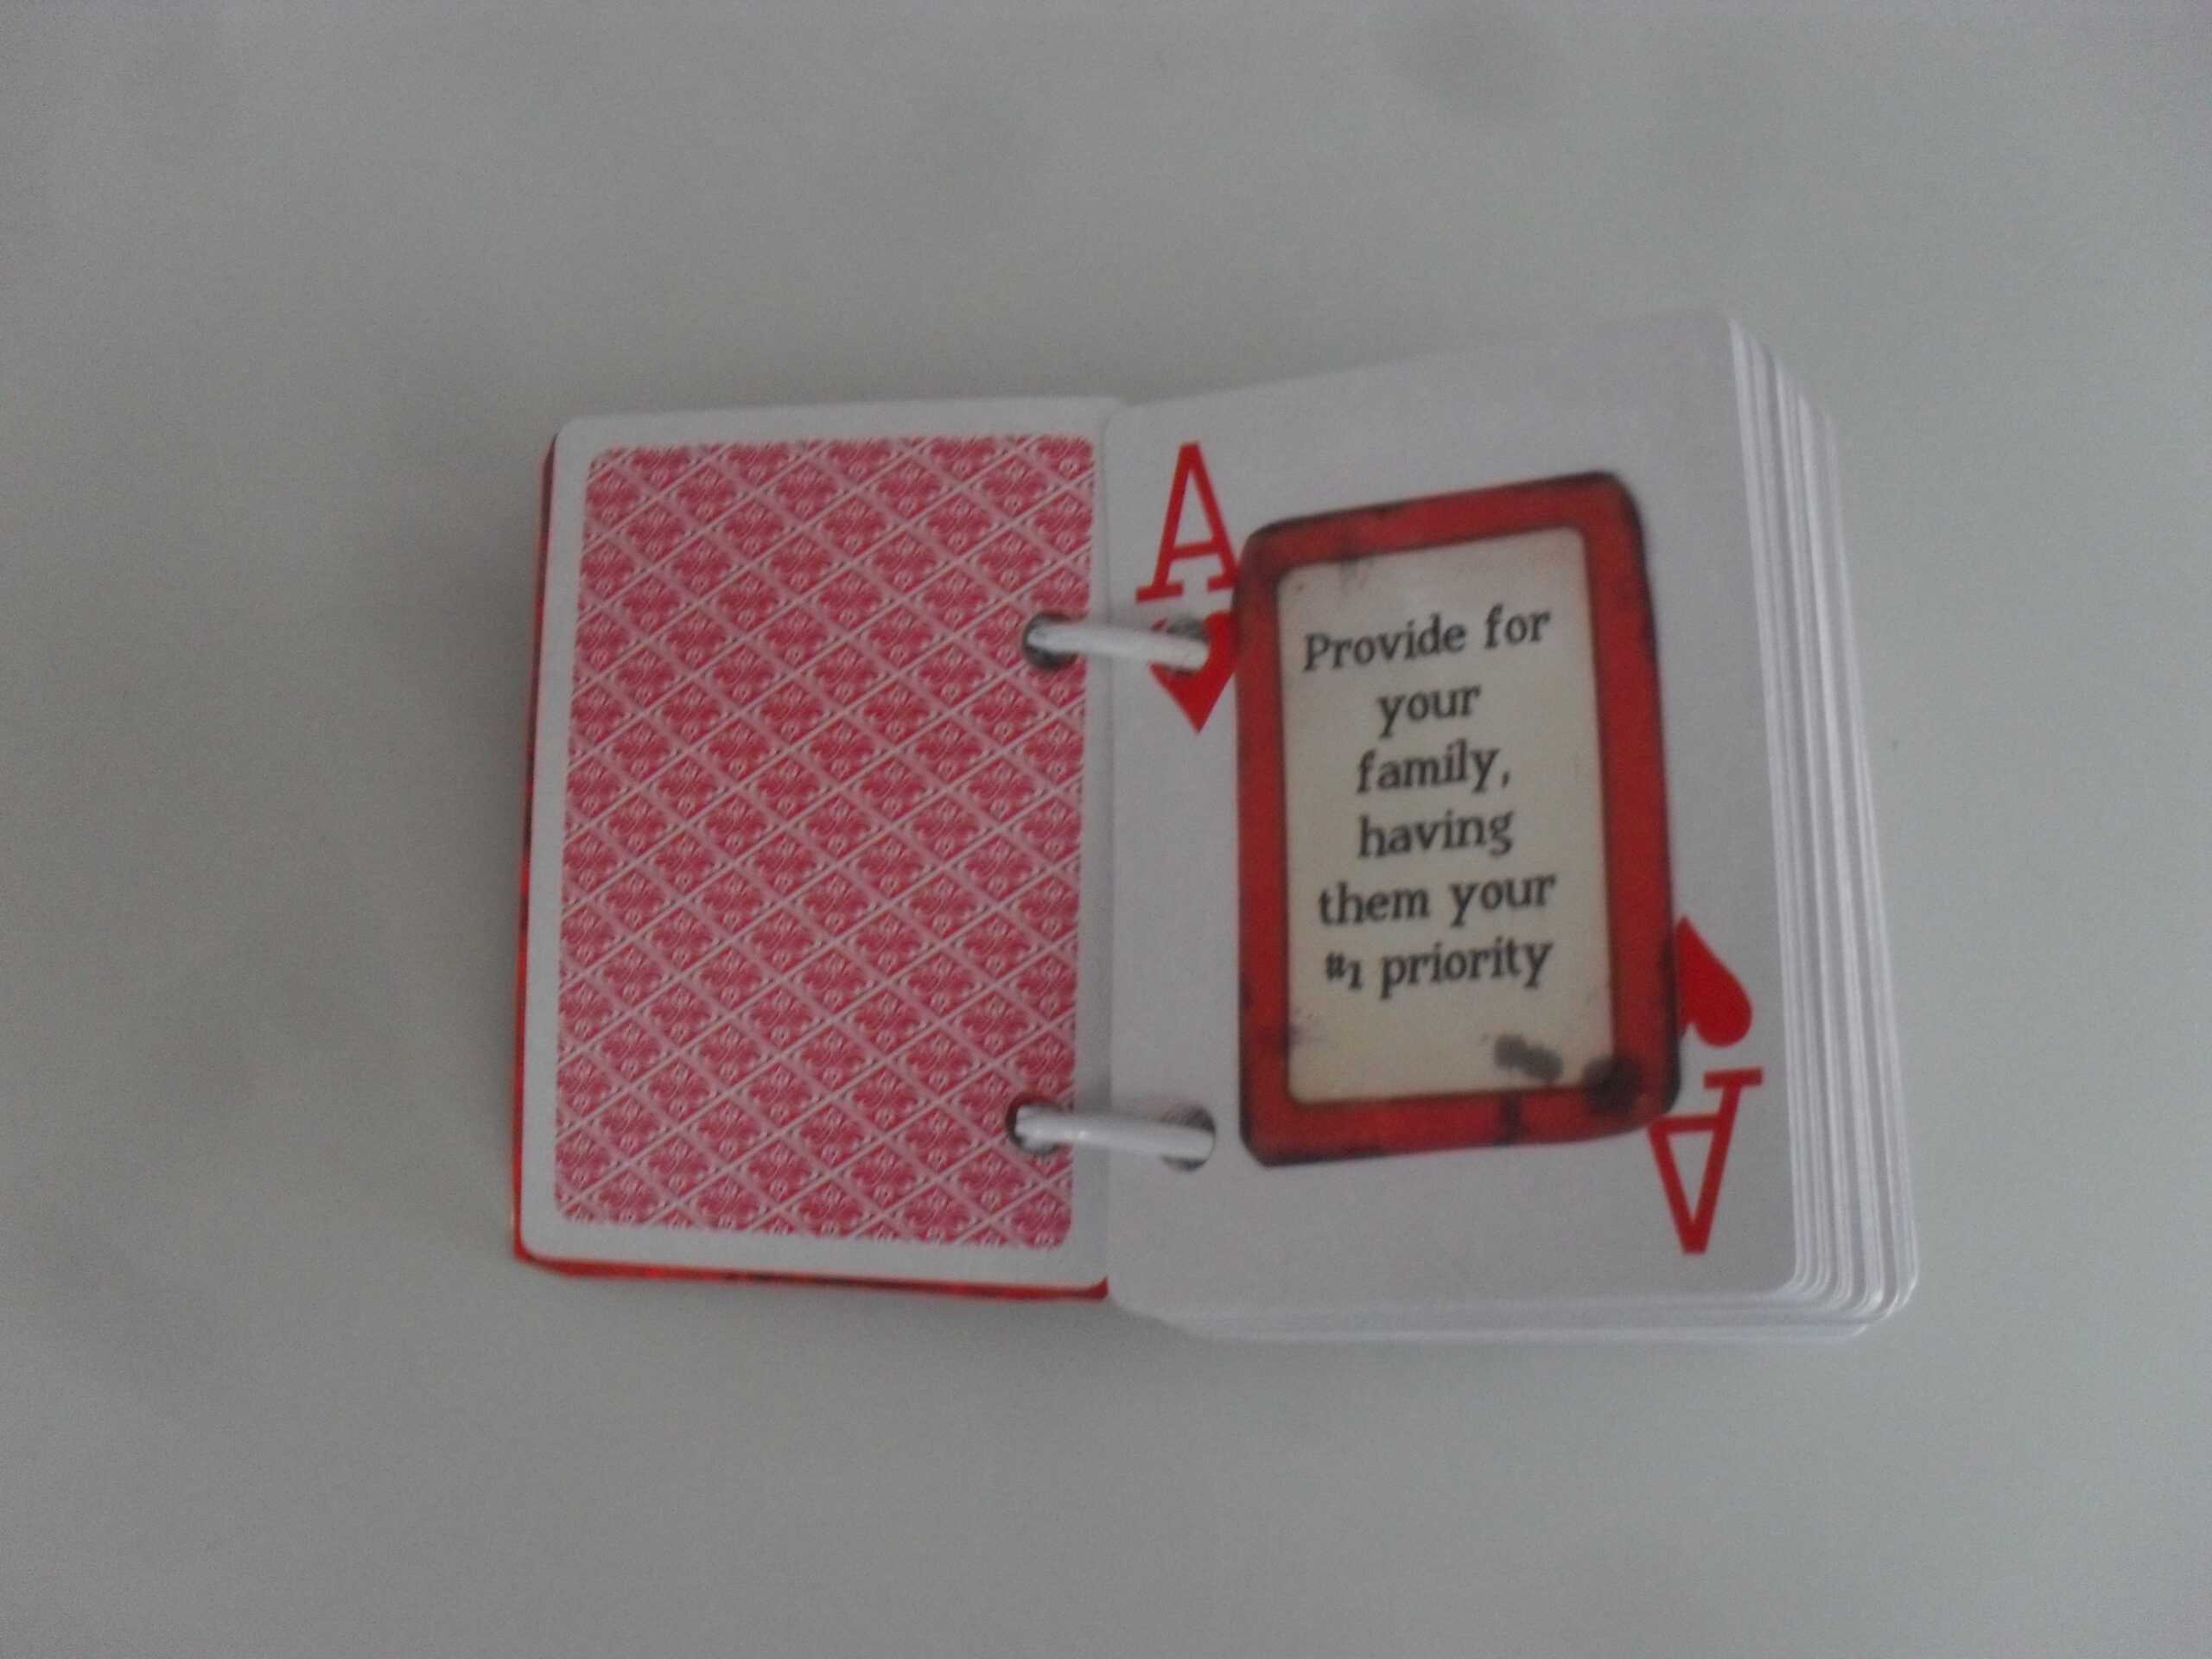 52 Reasons Why I Love You* | Tasteful Space Regarding 52 Things I Love About You Deck Of Cards Template